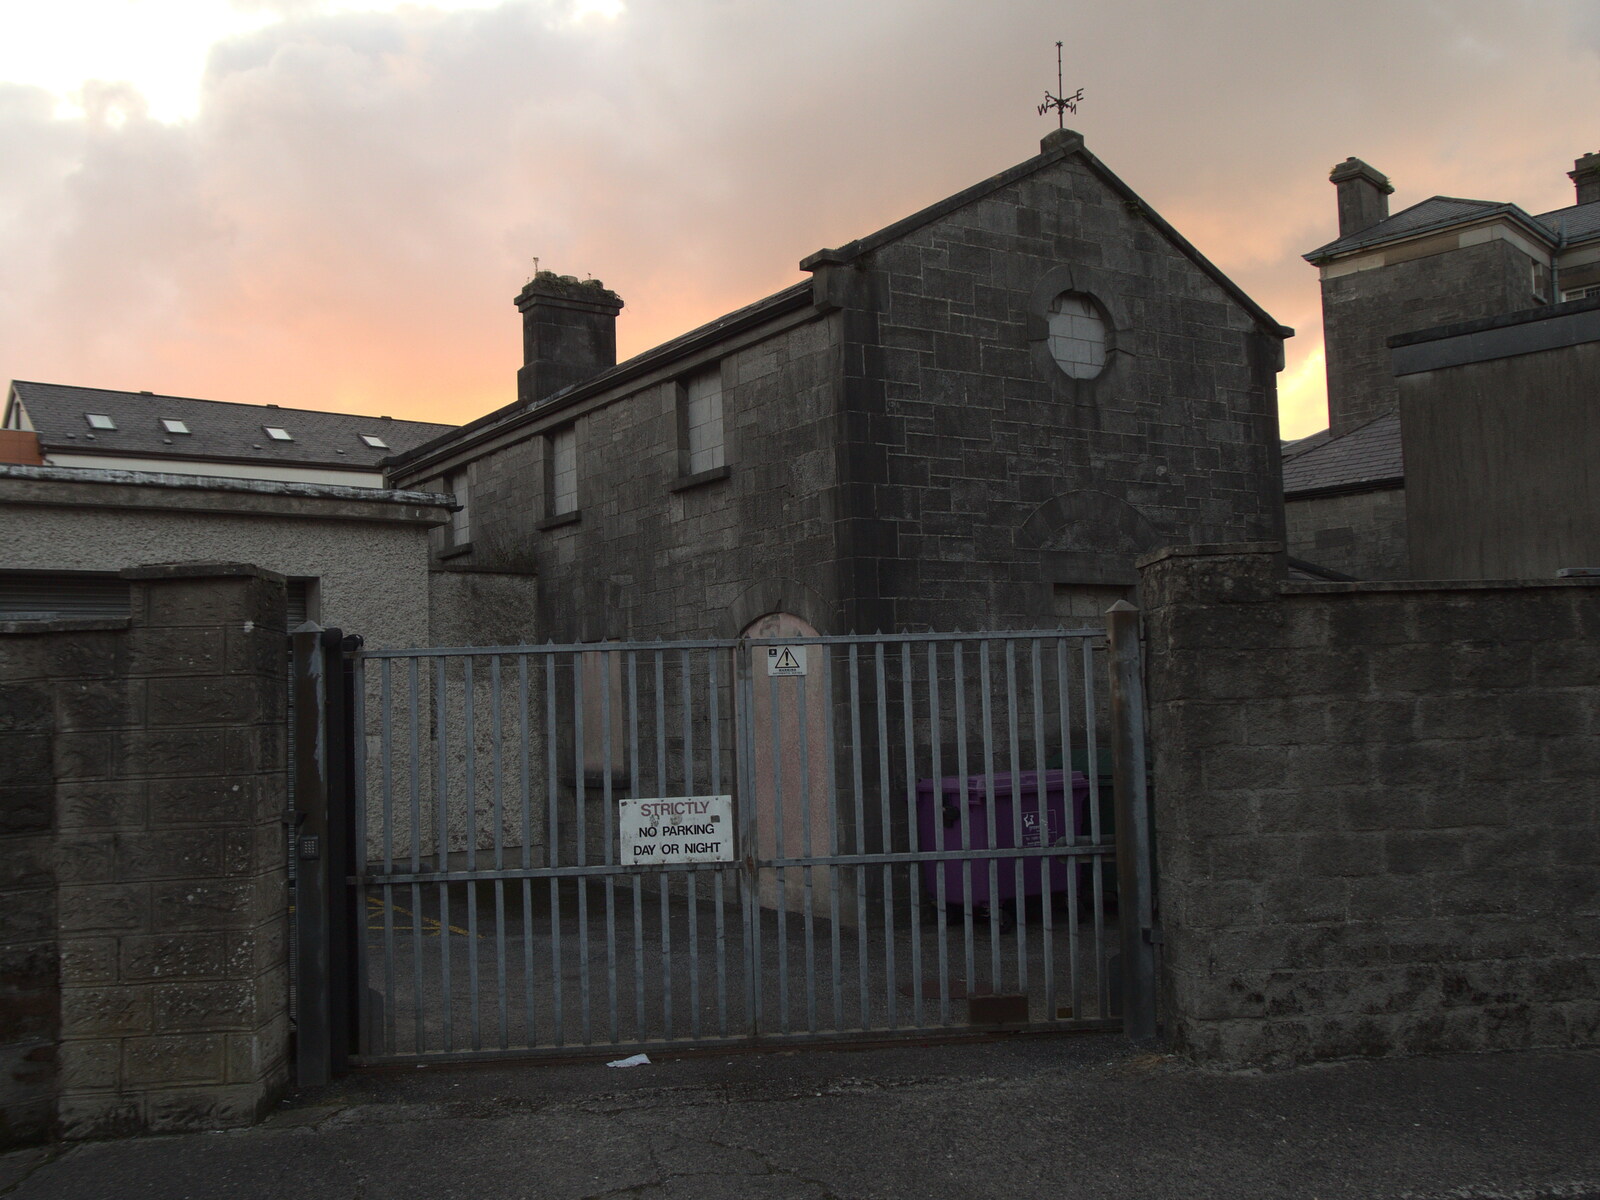 A Trip to Manorhamilton, County Leitrim, Ireland - 11th August 2021: Grim-looking buildings